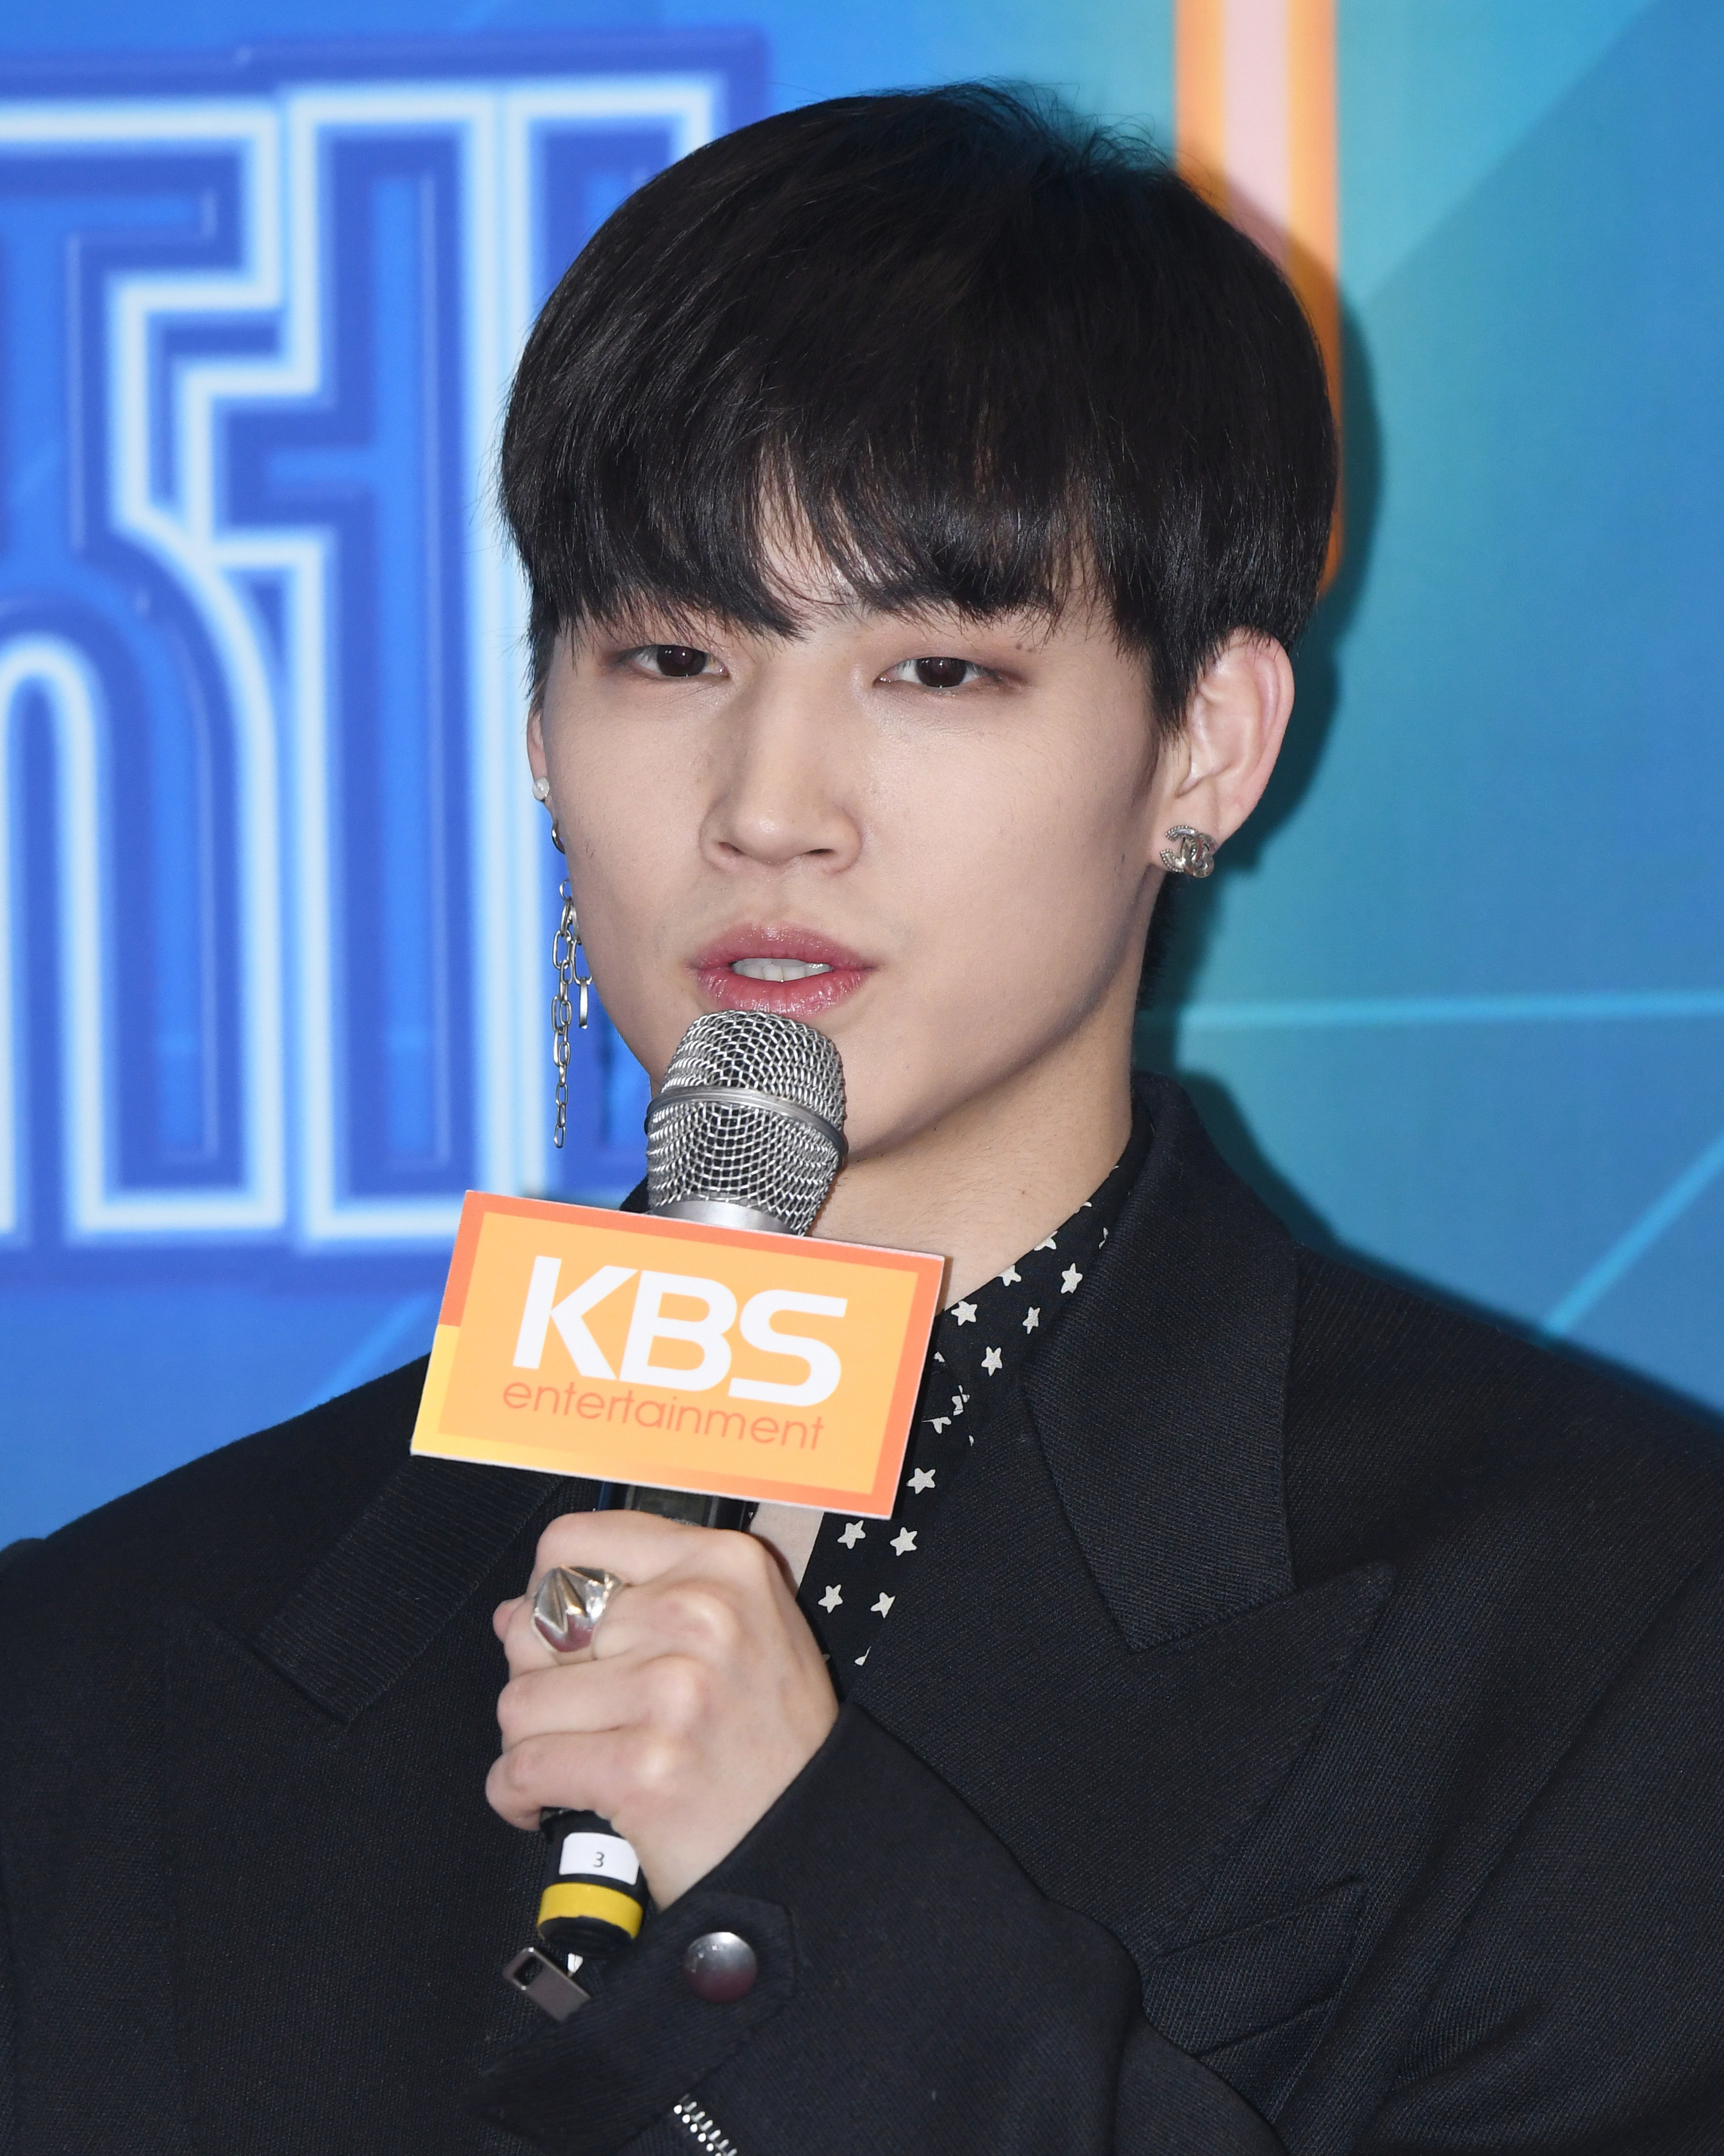 JB holds a microphone to his mouth with a sign on it saying quot;KBS entertainmentquot;; he has floppy black hair that brushes his eyebrows and wears a long dangling silver earring in one ear